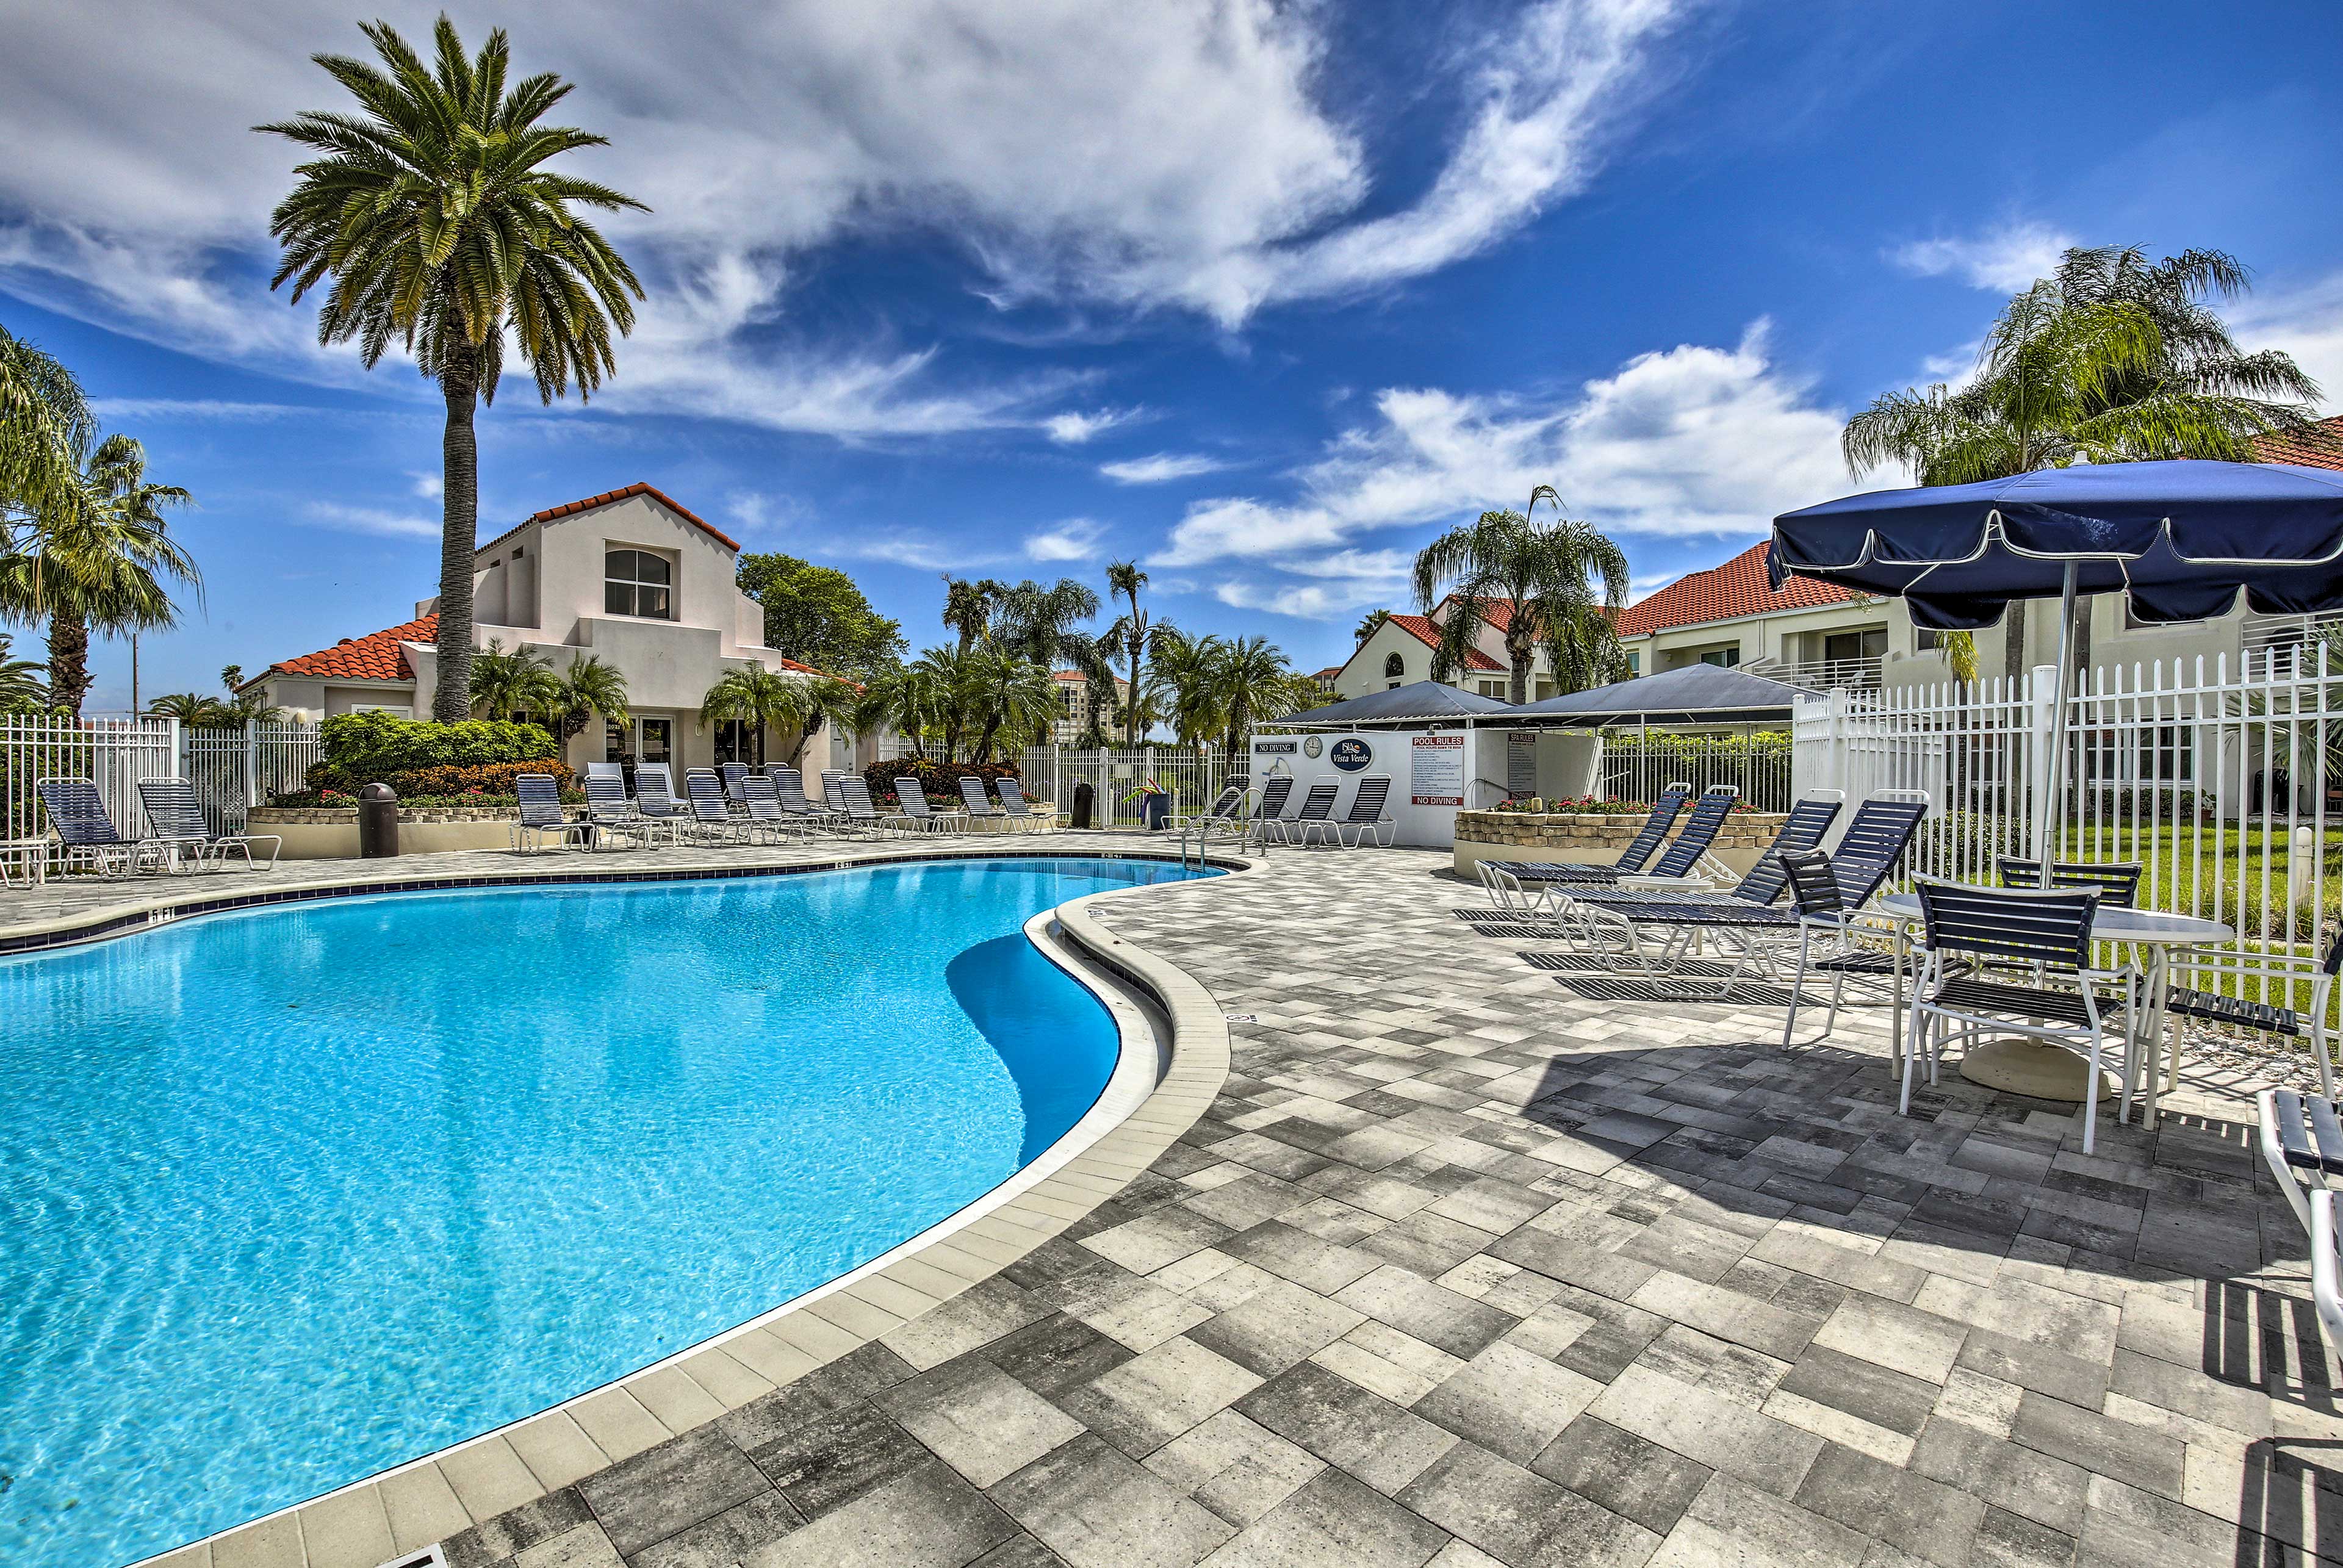 Property Image 1 - St Pete Condo w/ Heated Pool - 3 Miles to Beach!